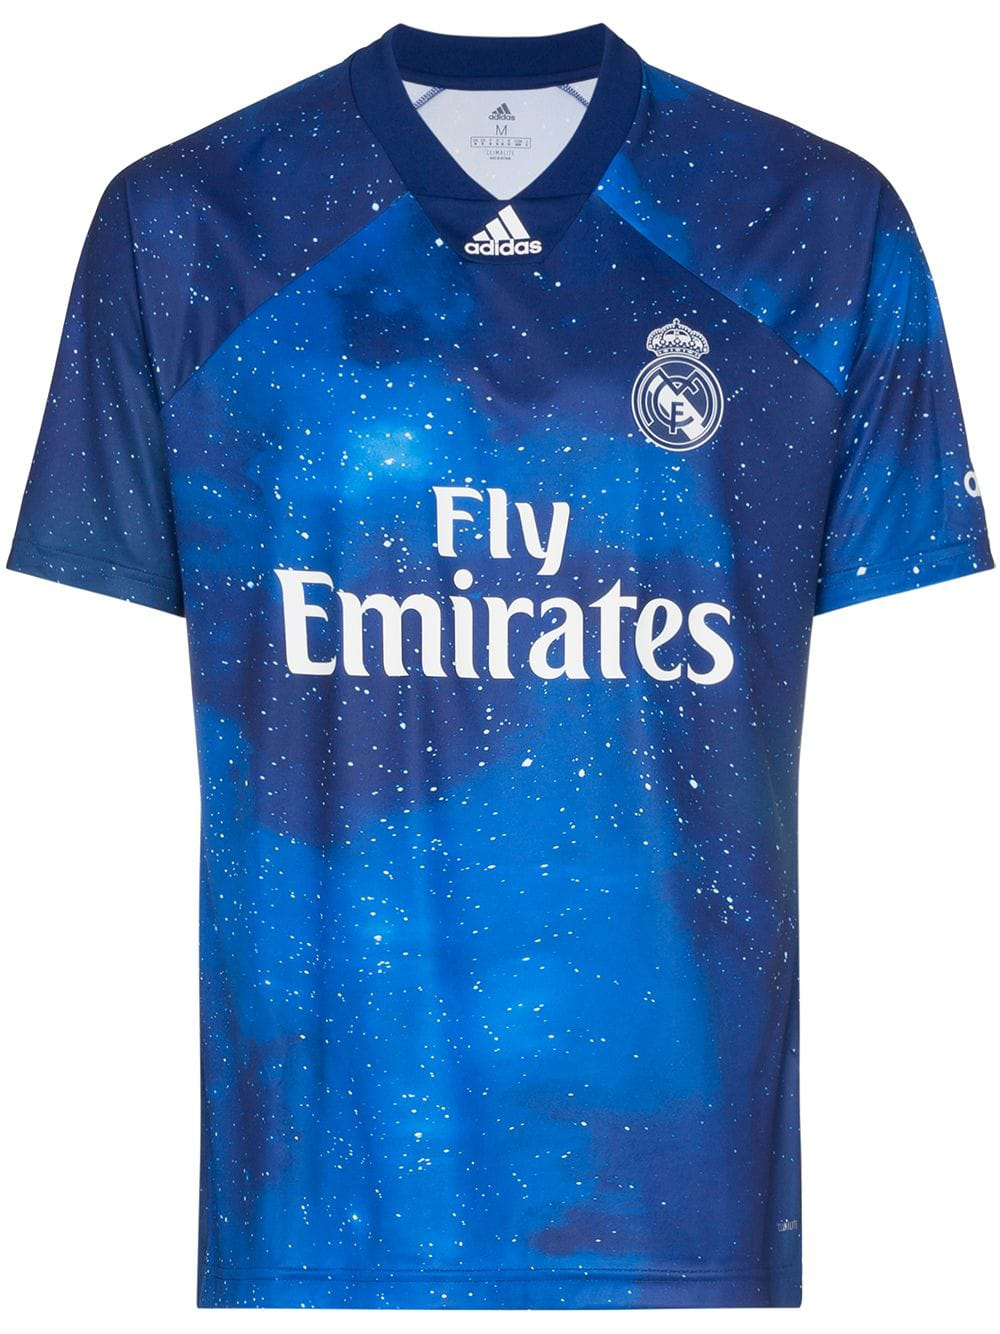 real madrid ea jersey